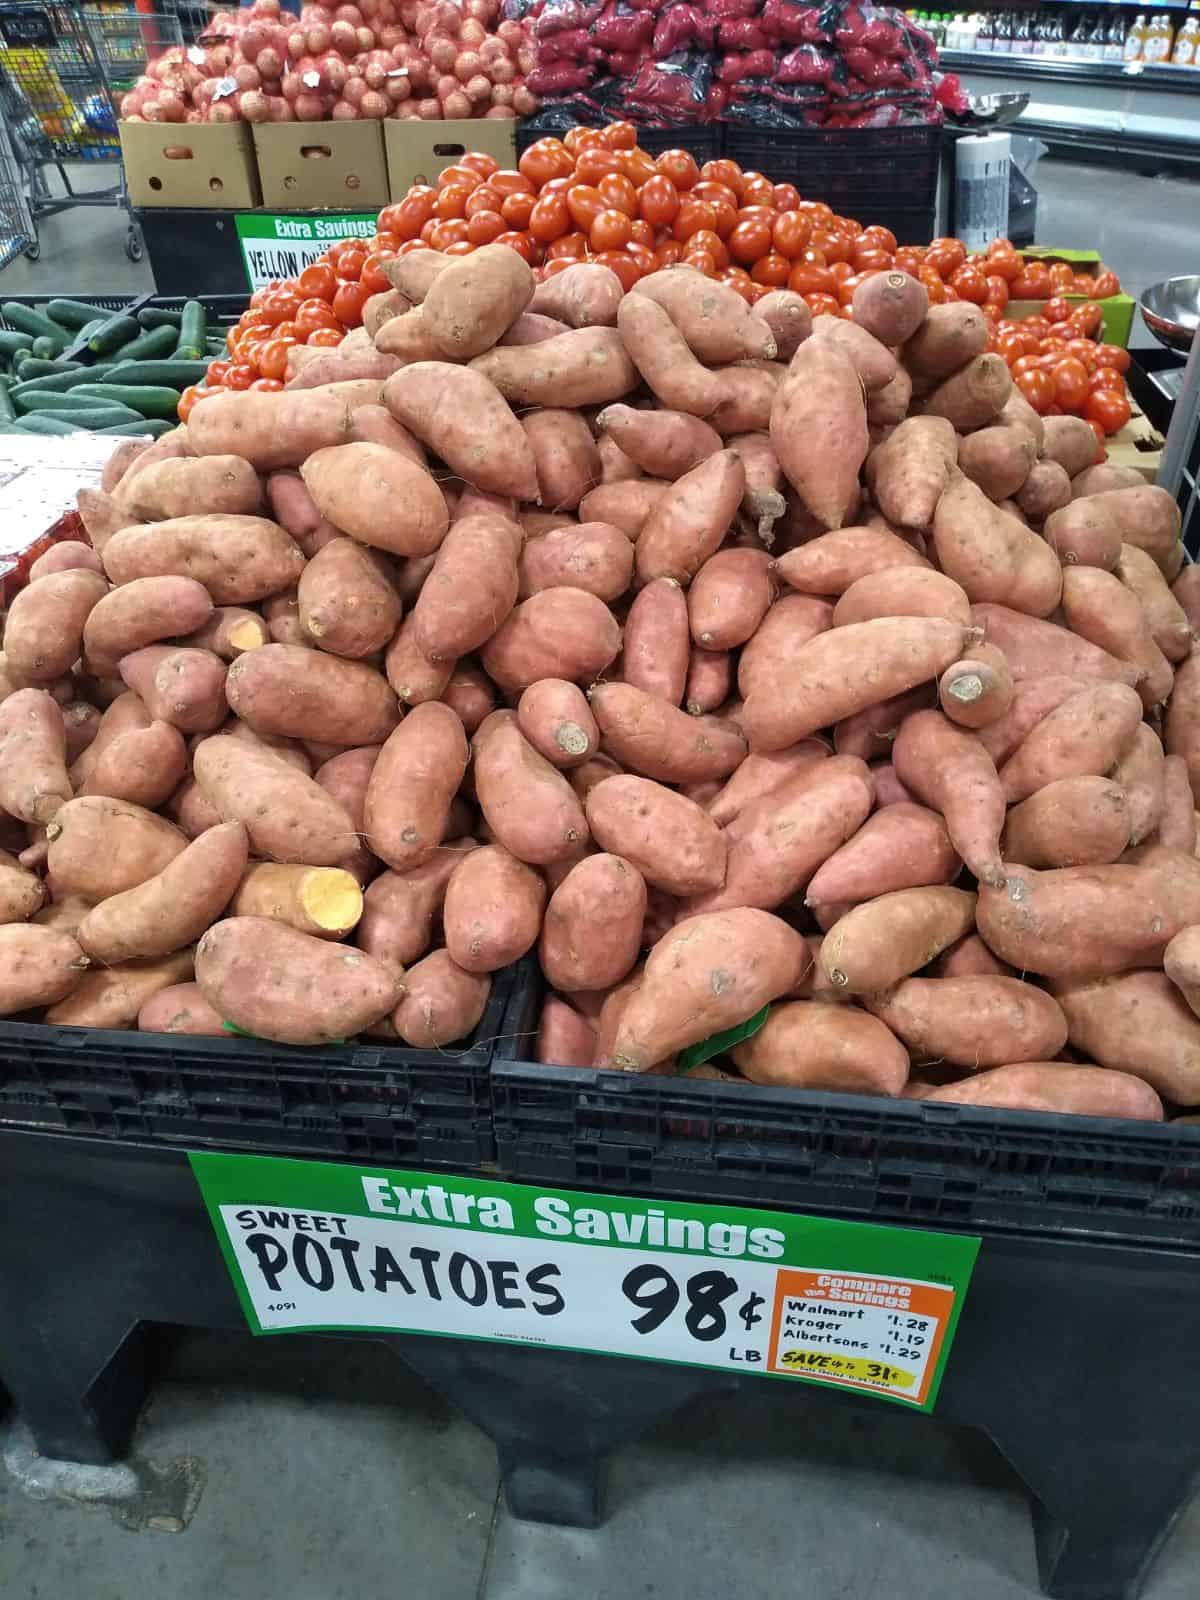 A large black bin of sweet potatoes with a sign saying they are being sold for 98 cents per pound.